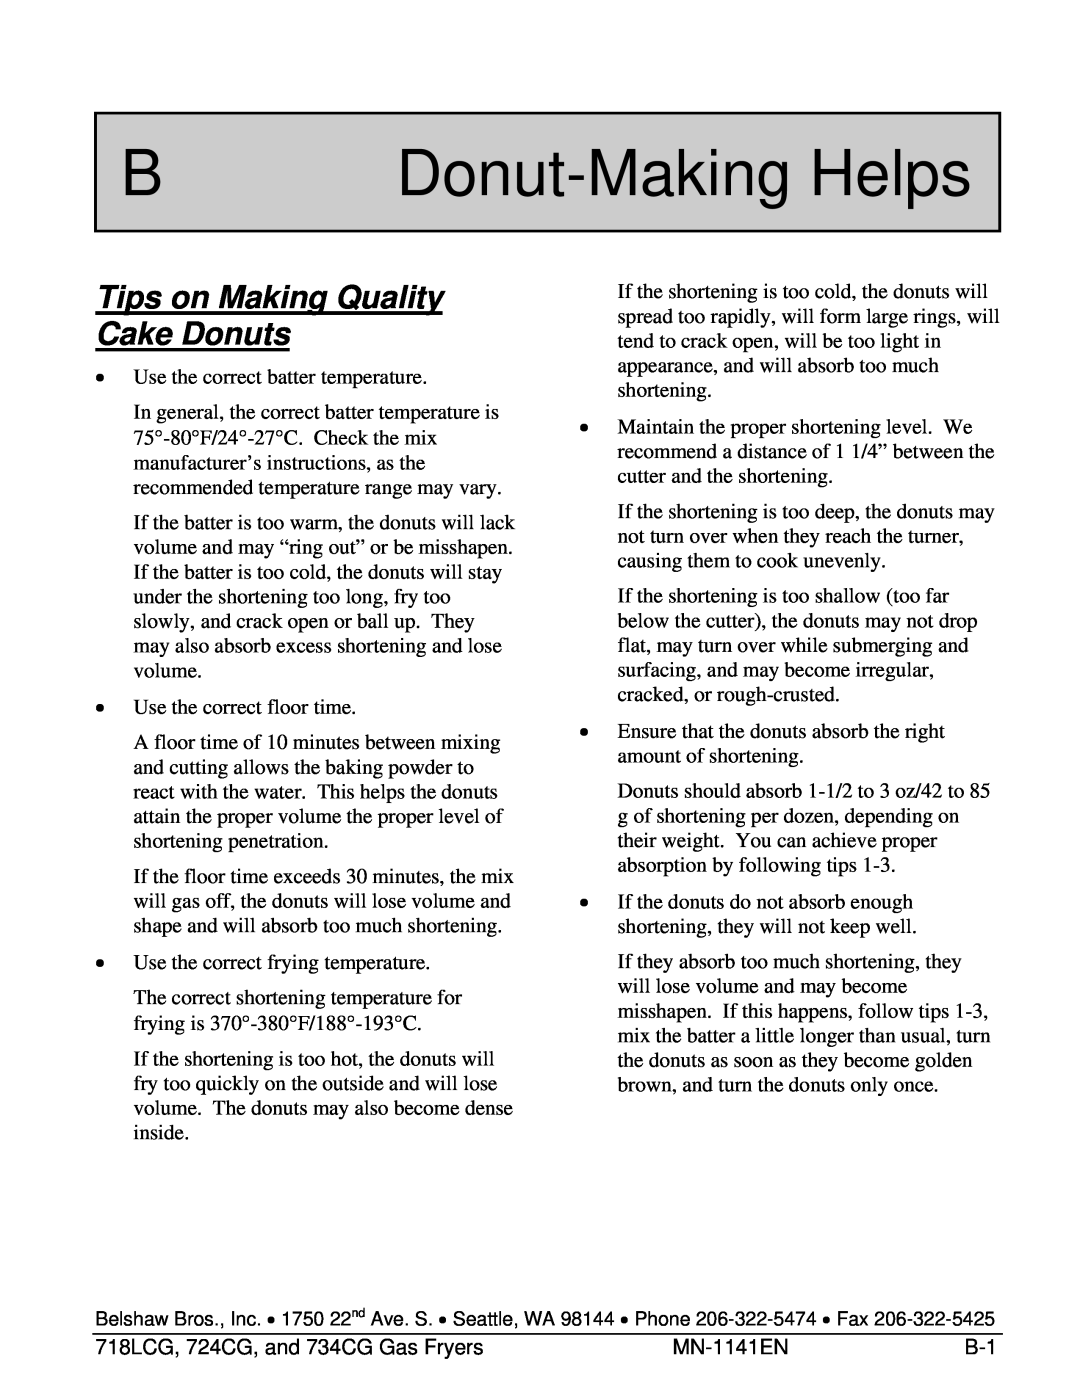 Belshaw Brothers 724CG, and 734CG, 718LCG manual B Donut-Making Helps, Tips on Making Quality Cake Donuts 